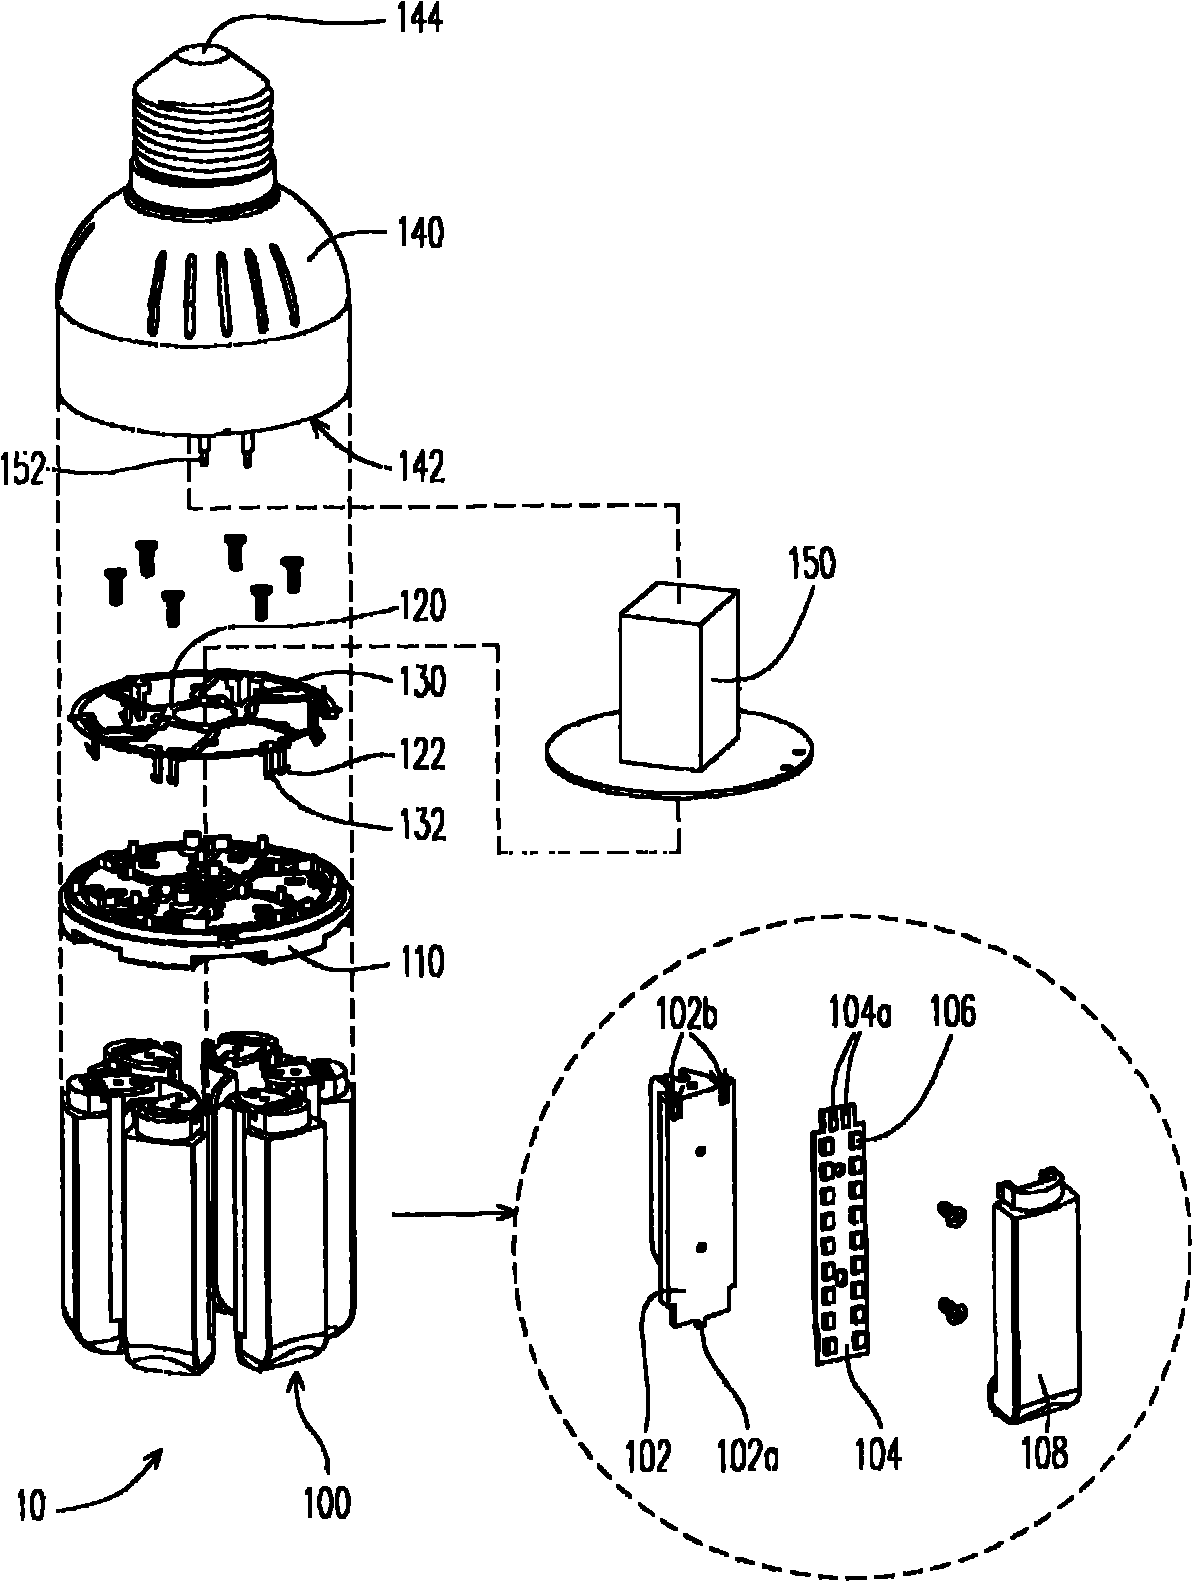 Lamp structure